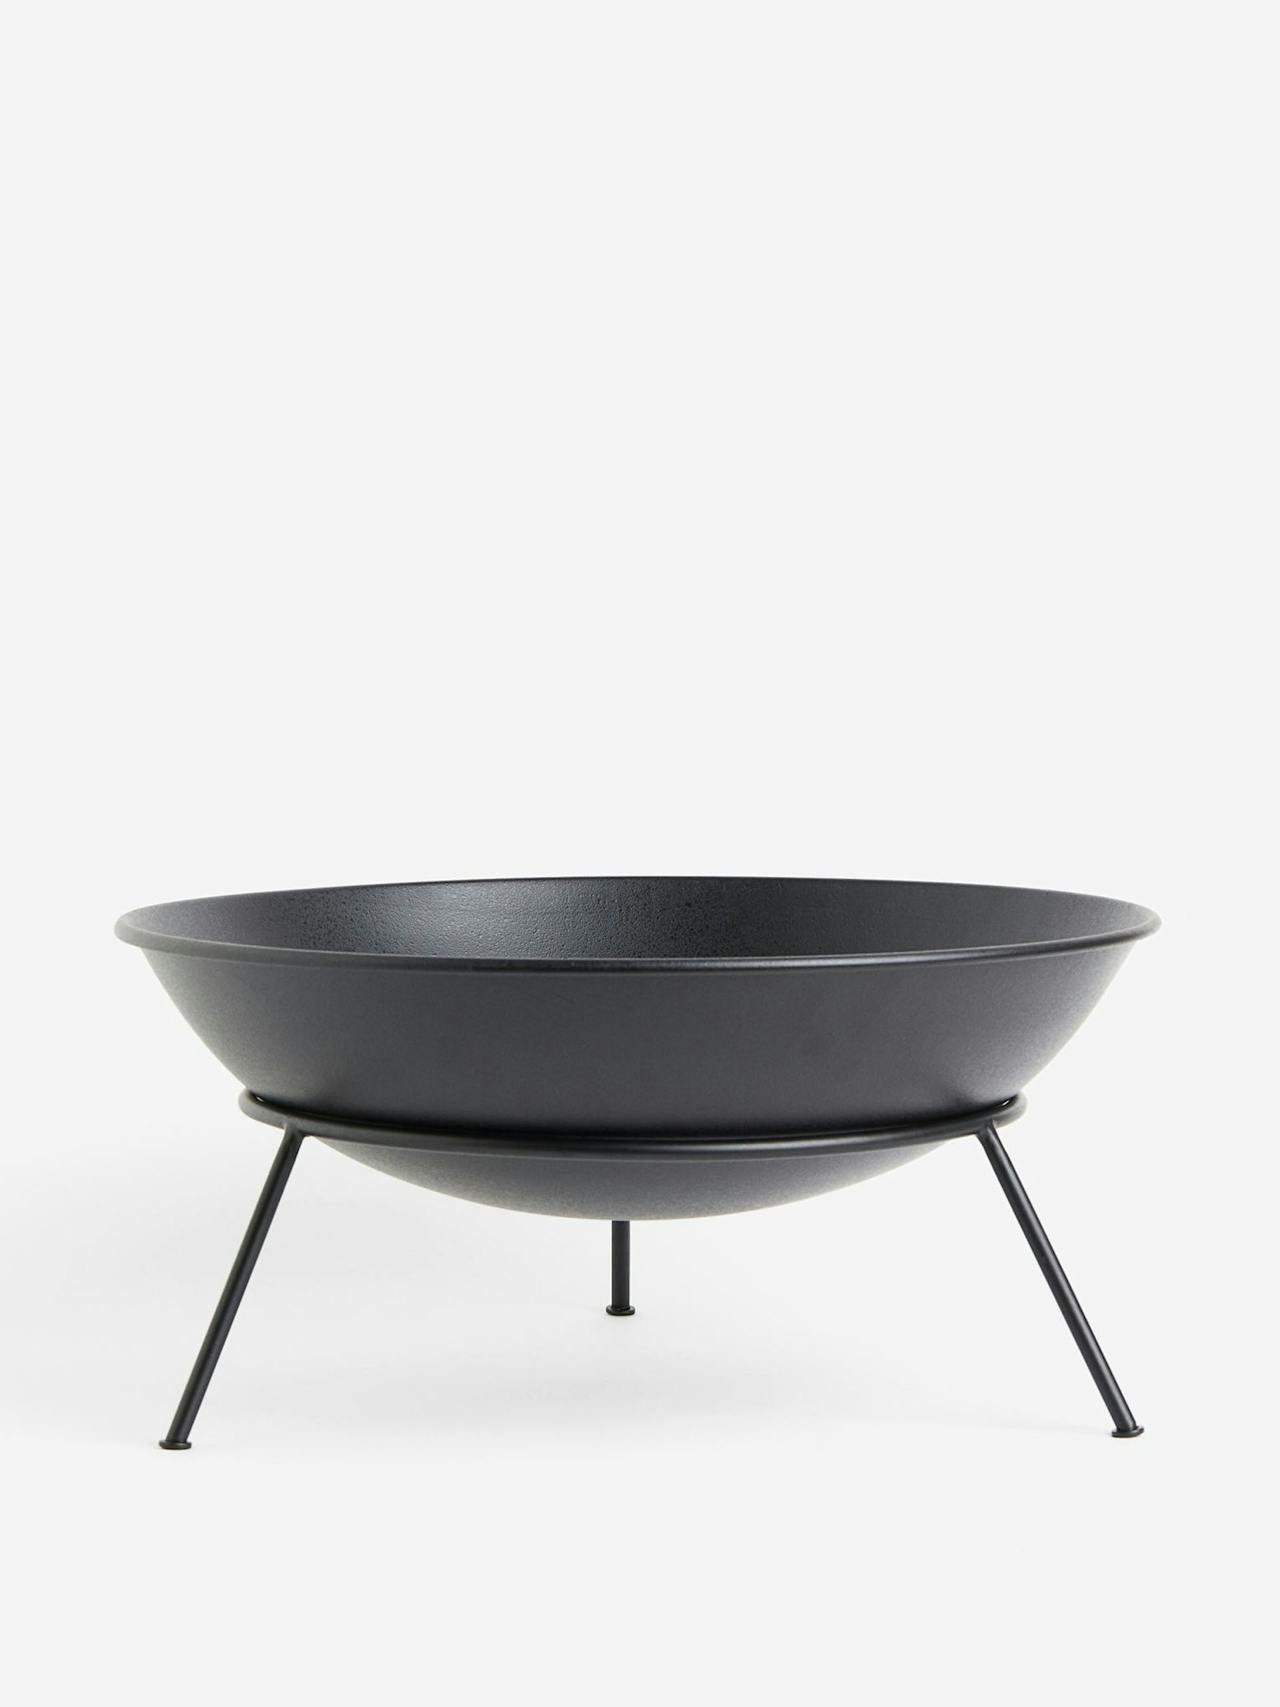 Extra-large fire bowl